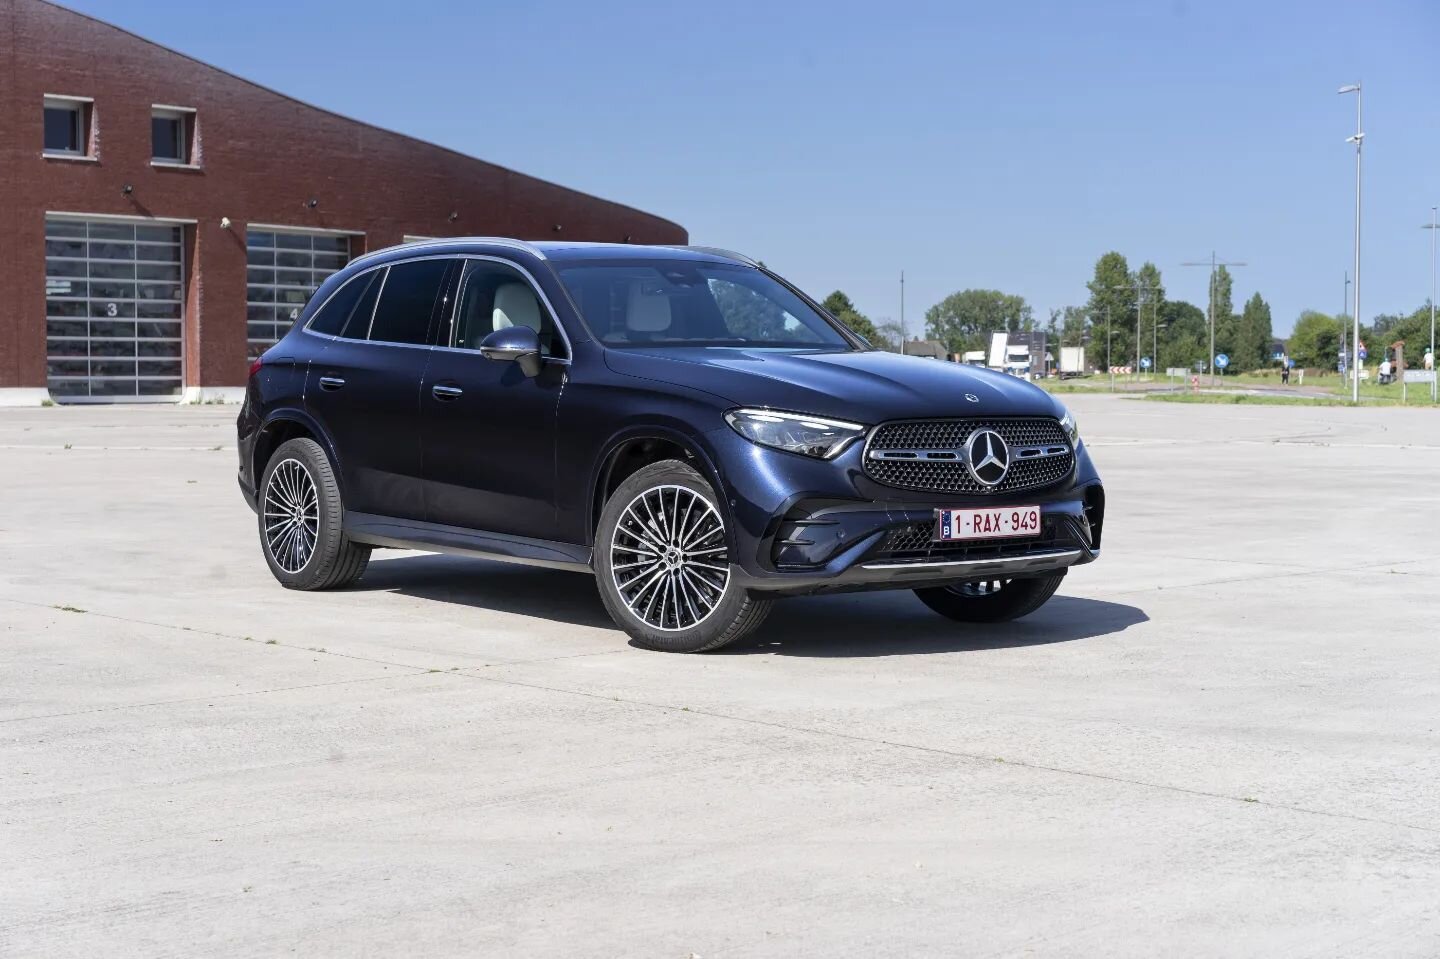 Mercedes-Benz GLC 400e, surprisingly fast
The range of the new Mercedes GLC includes not one or two, but three plug-in hybrid versions. Next to the GLC 300e and GLC300de, we took the fastest and most powerful plug-in hybrid of the bunch, the GLC 400e